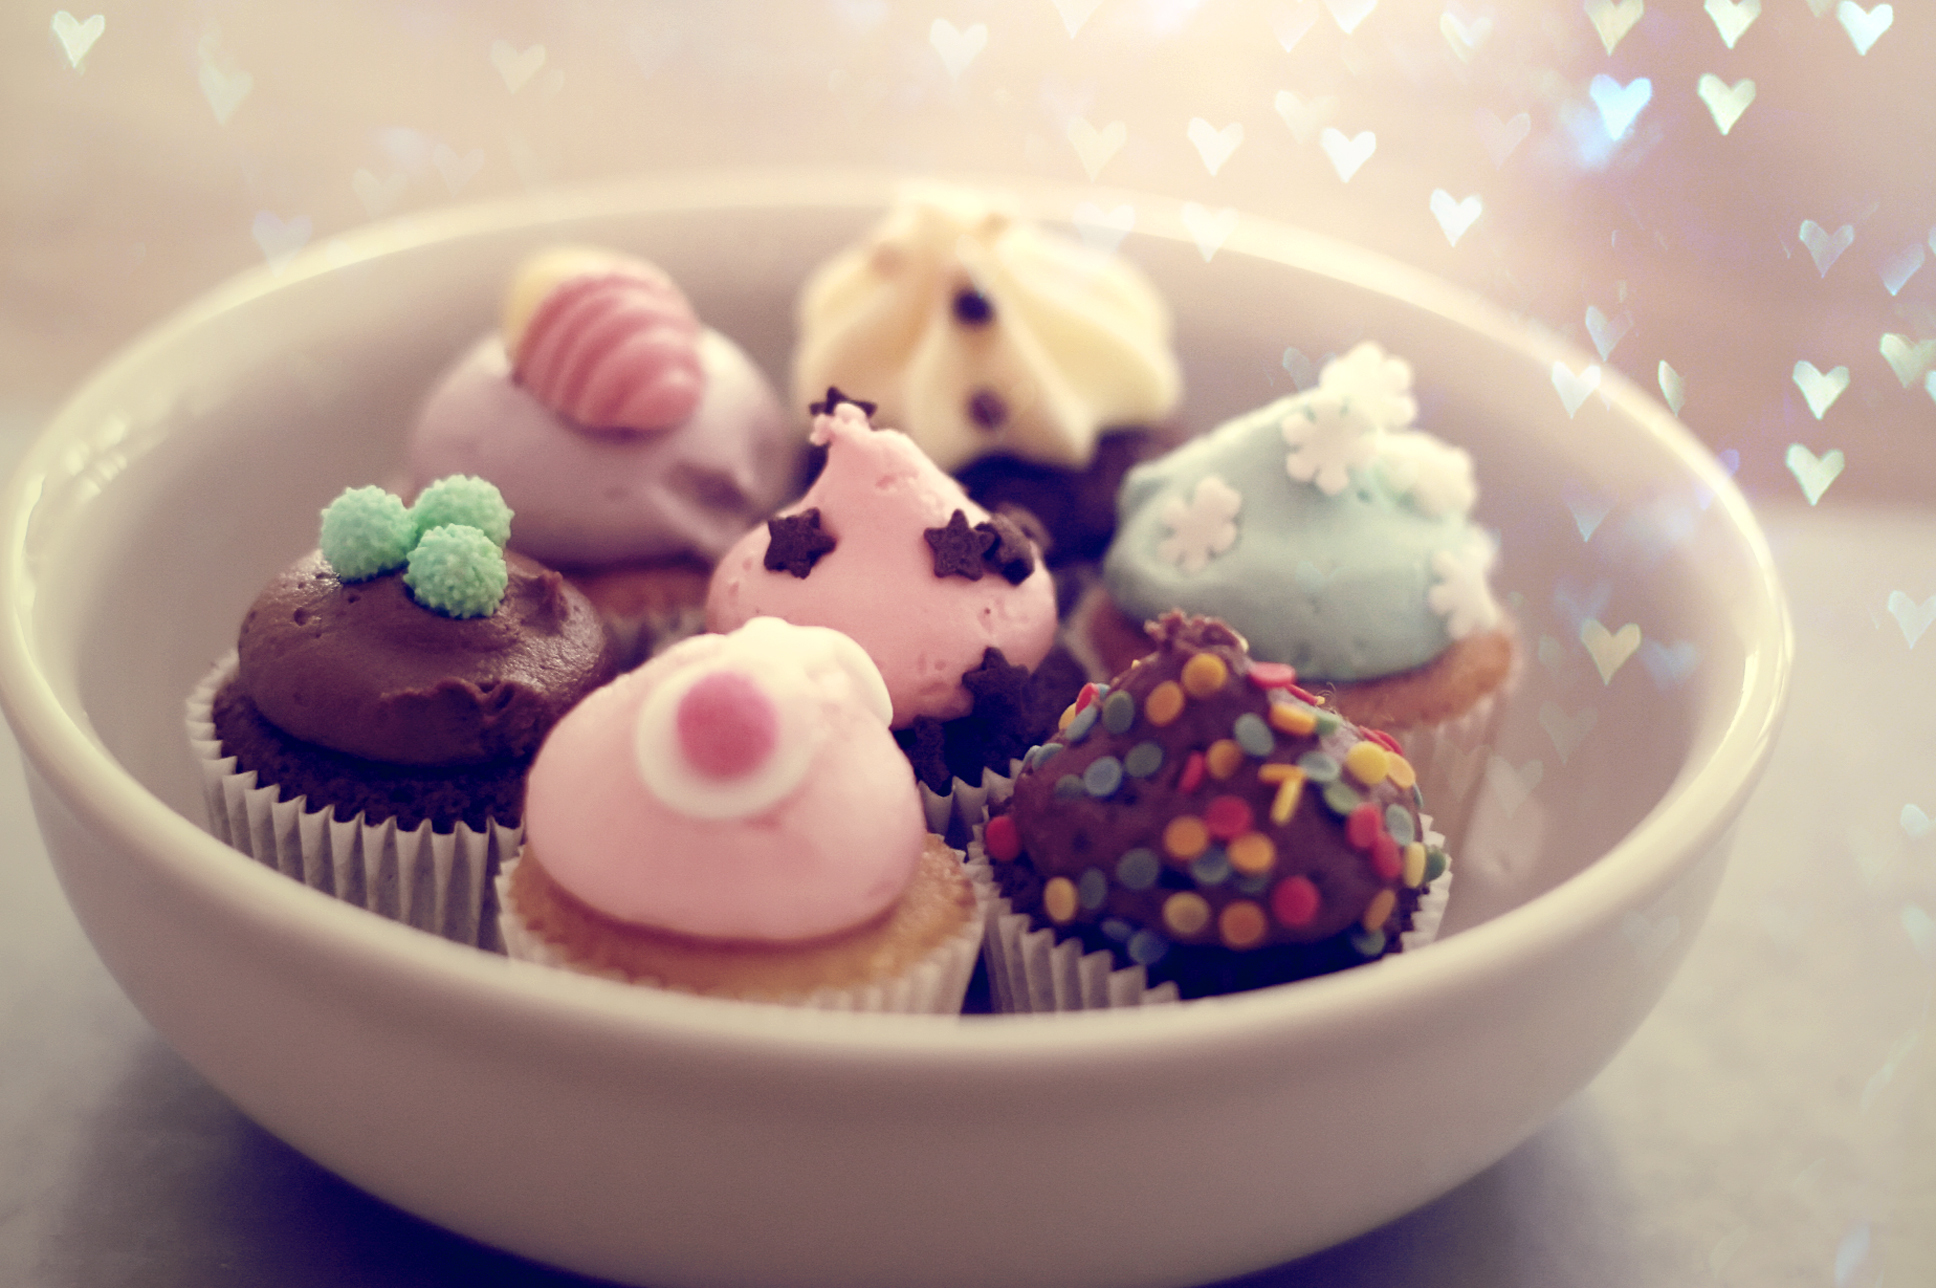 Best Cupcakes wallpapers for phone screen